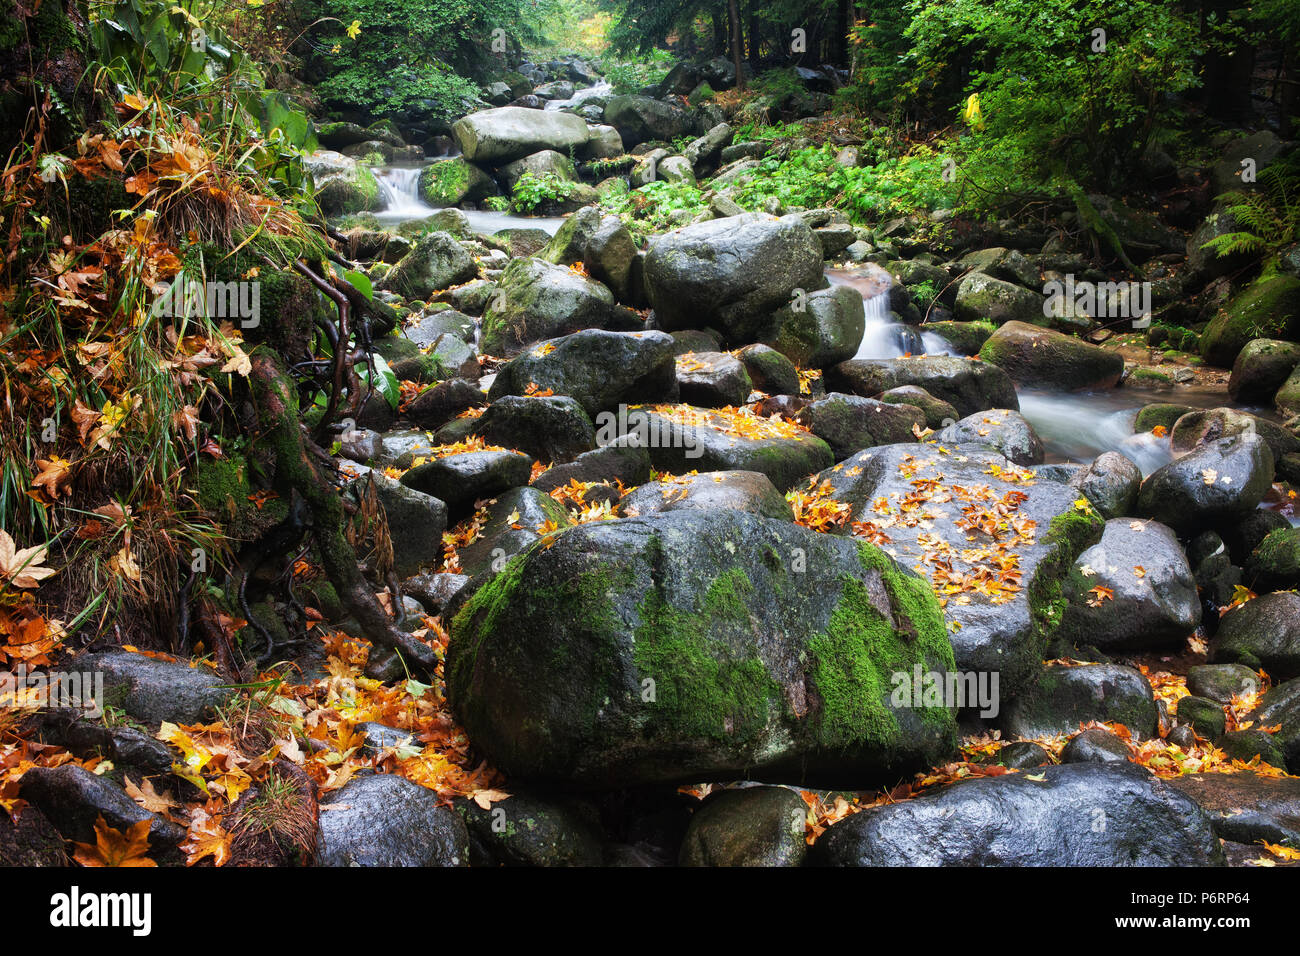 Stream in mountain forest with mossy boulder rocks and fallen leaves, nature wilderness in Karkonosze Mountains, Sudetes, Poland Stock Photo